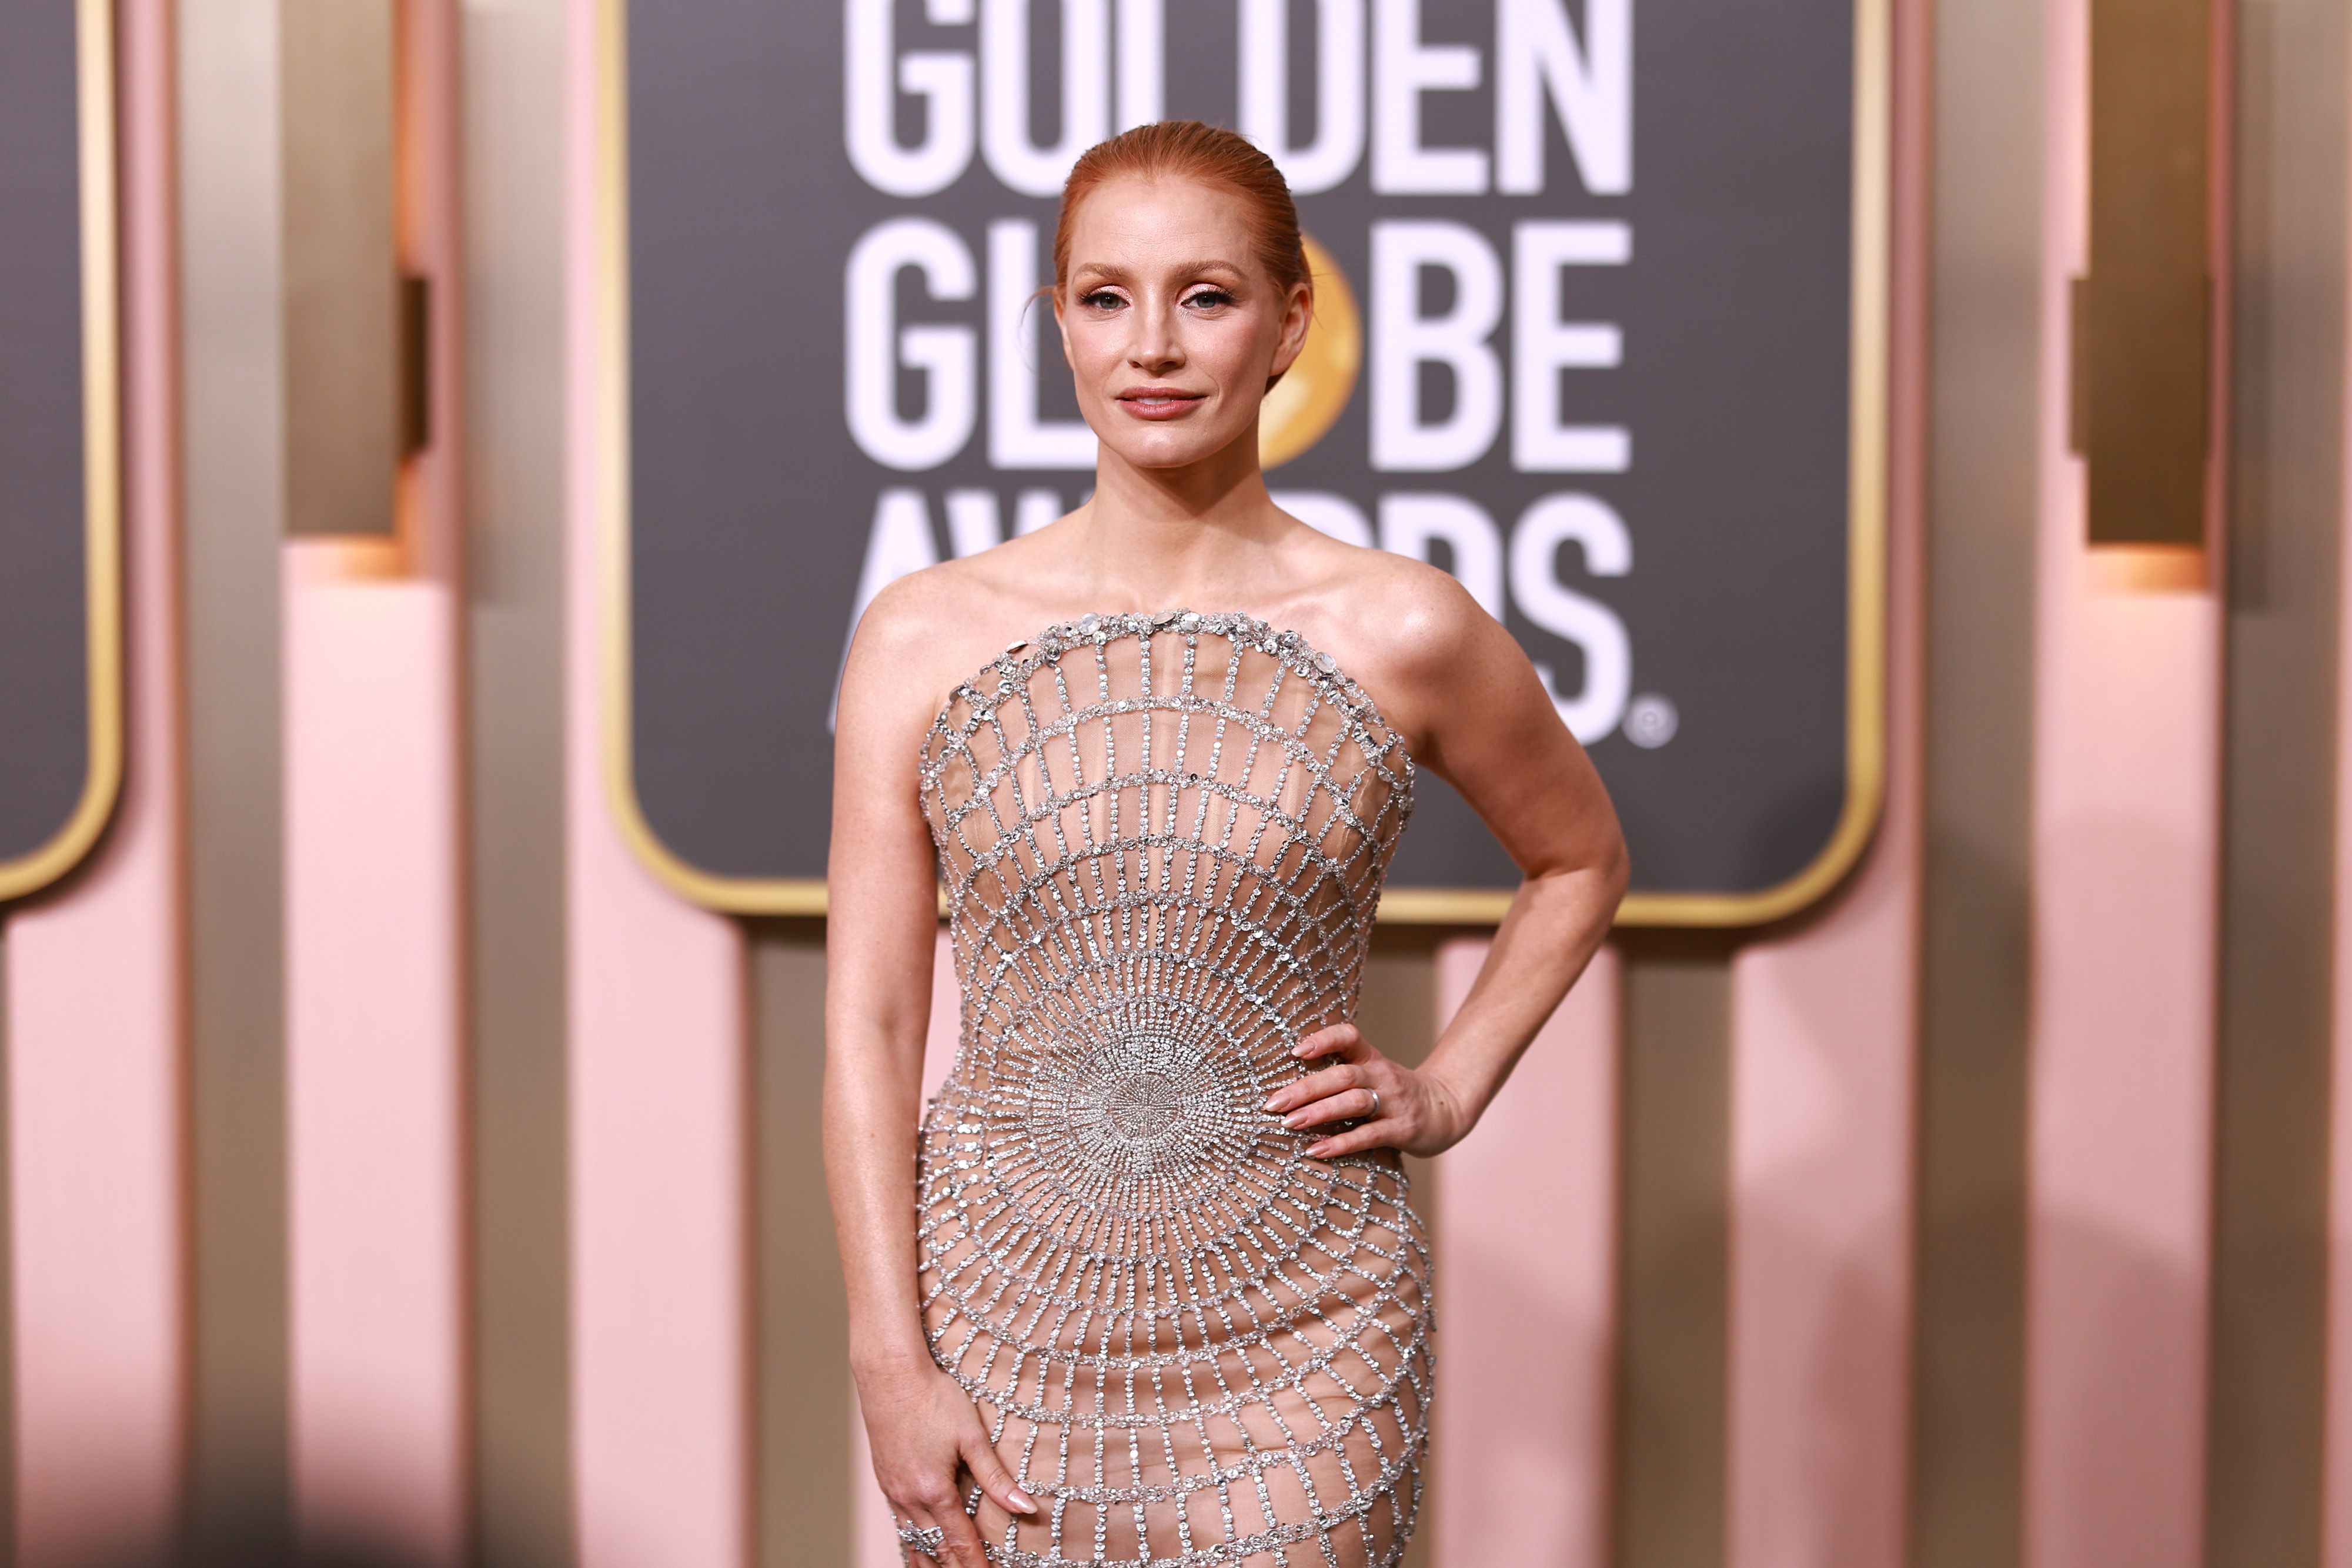 Leann Rimes Naked Porn - See Jessica Chastain Stun at the Golden Globes in a Jaw-Dropping Nude Dress